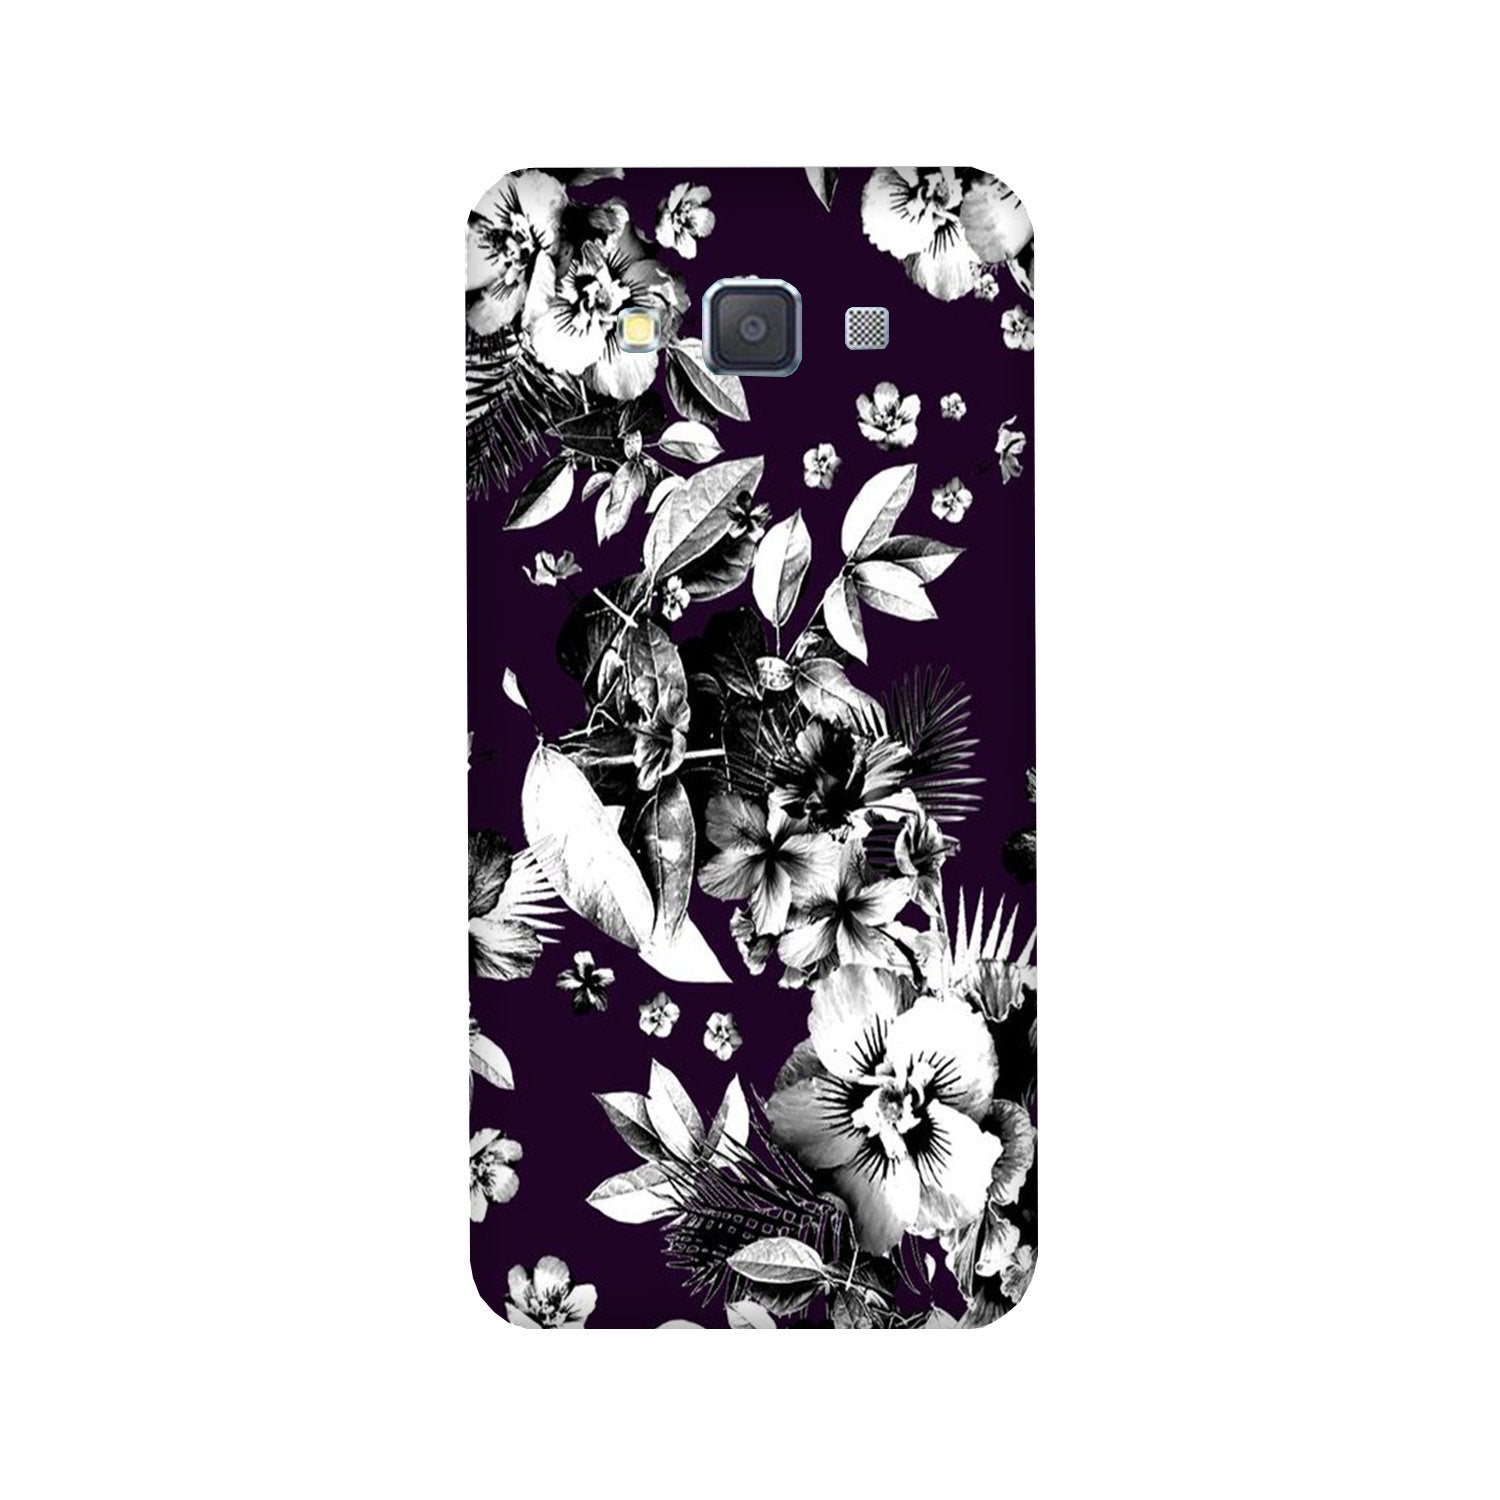 white flowers Case for Galaxy J7 (2016)